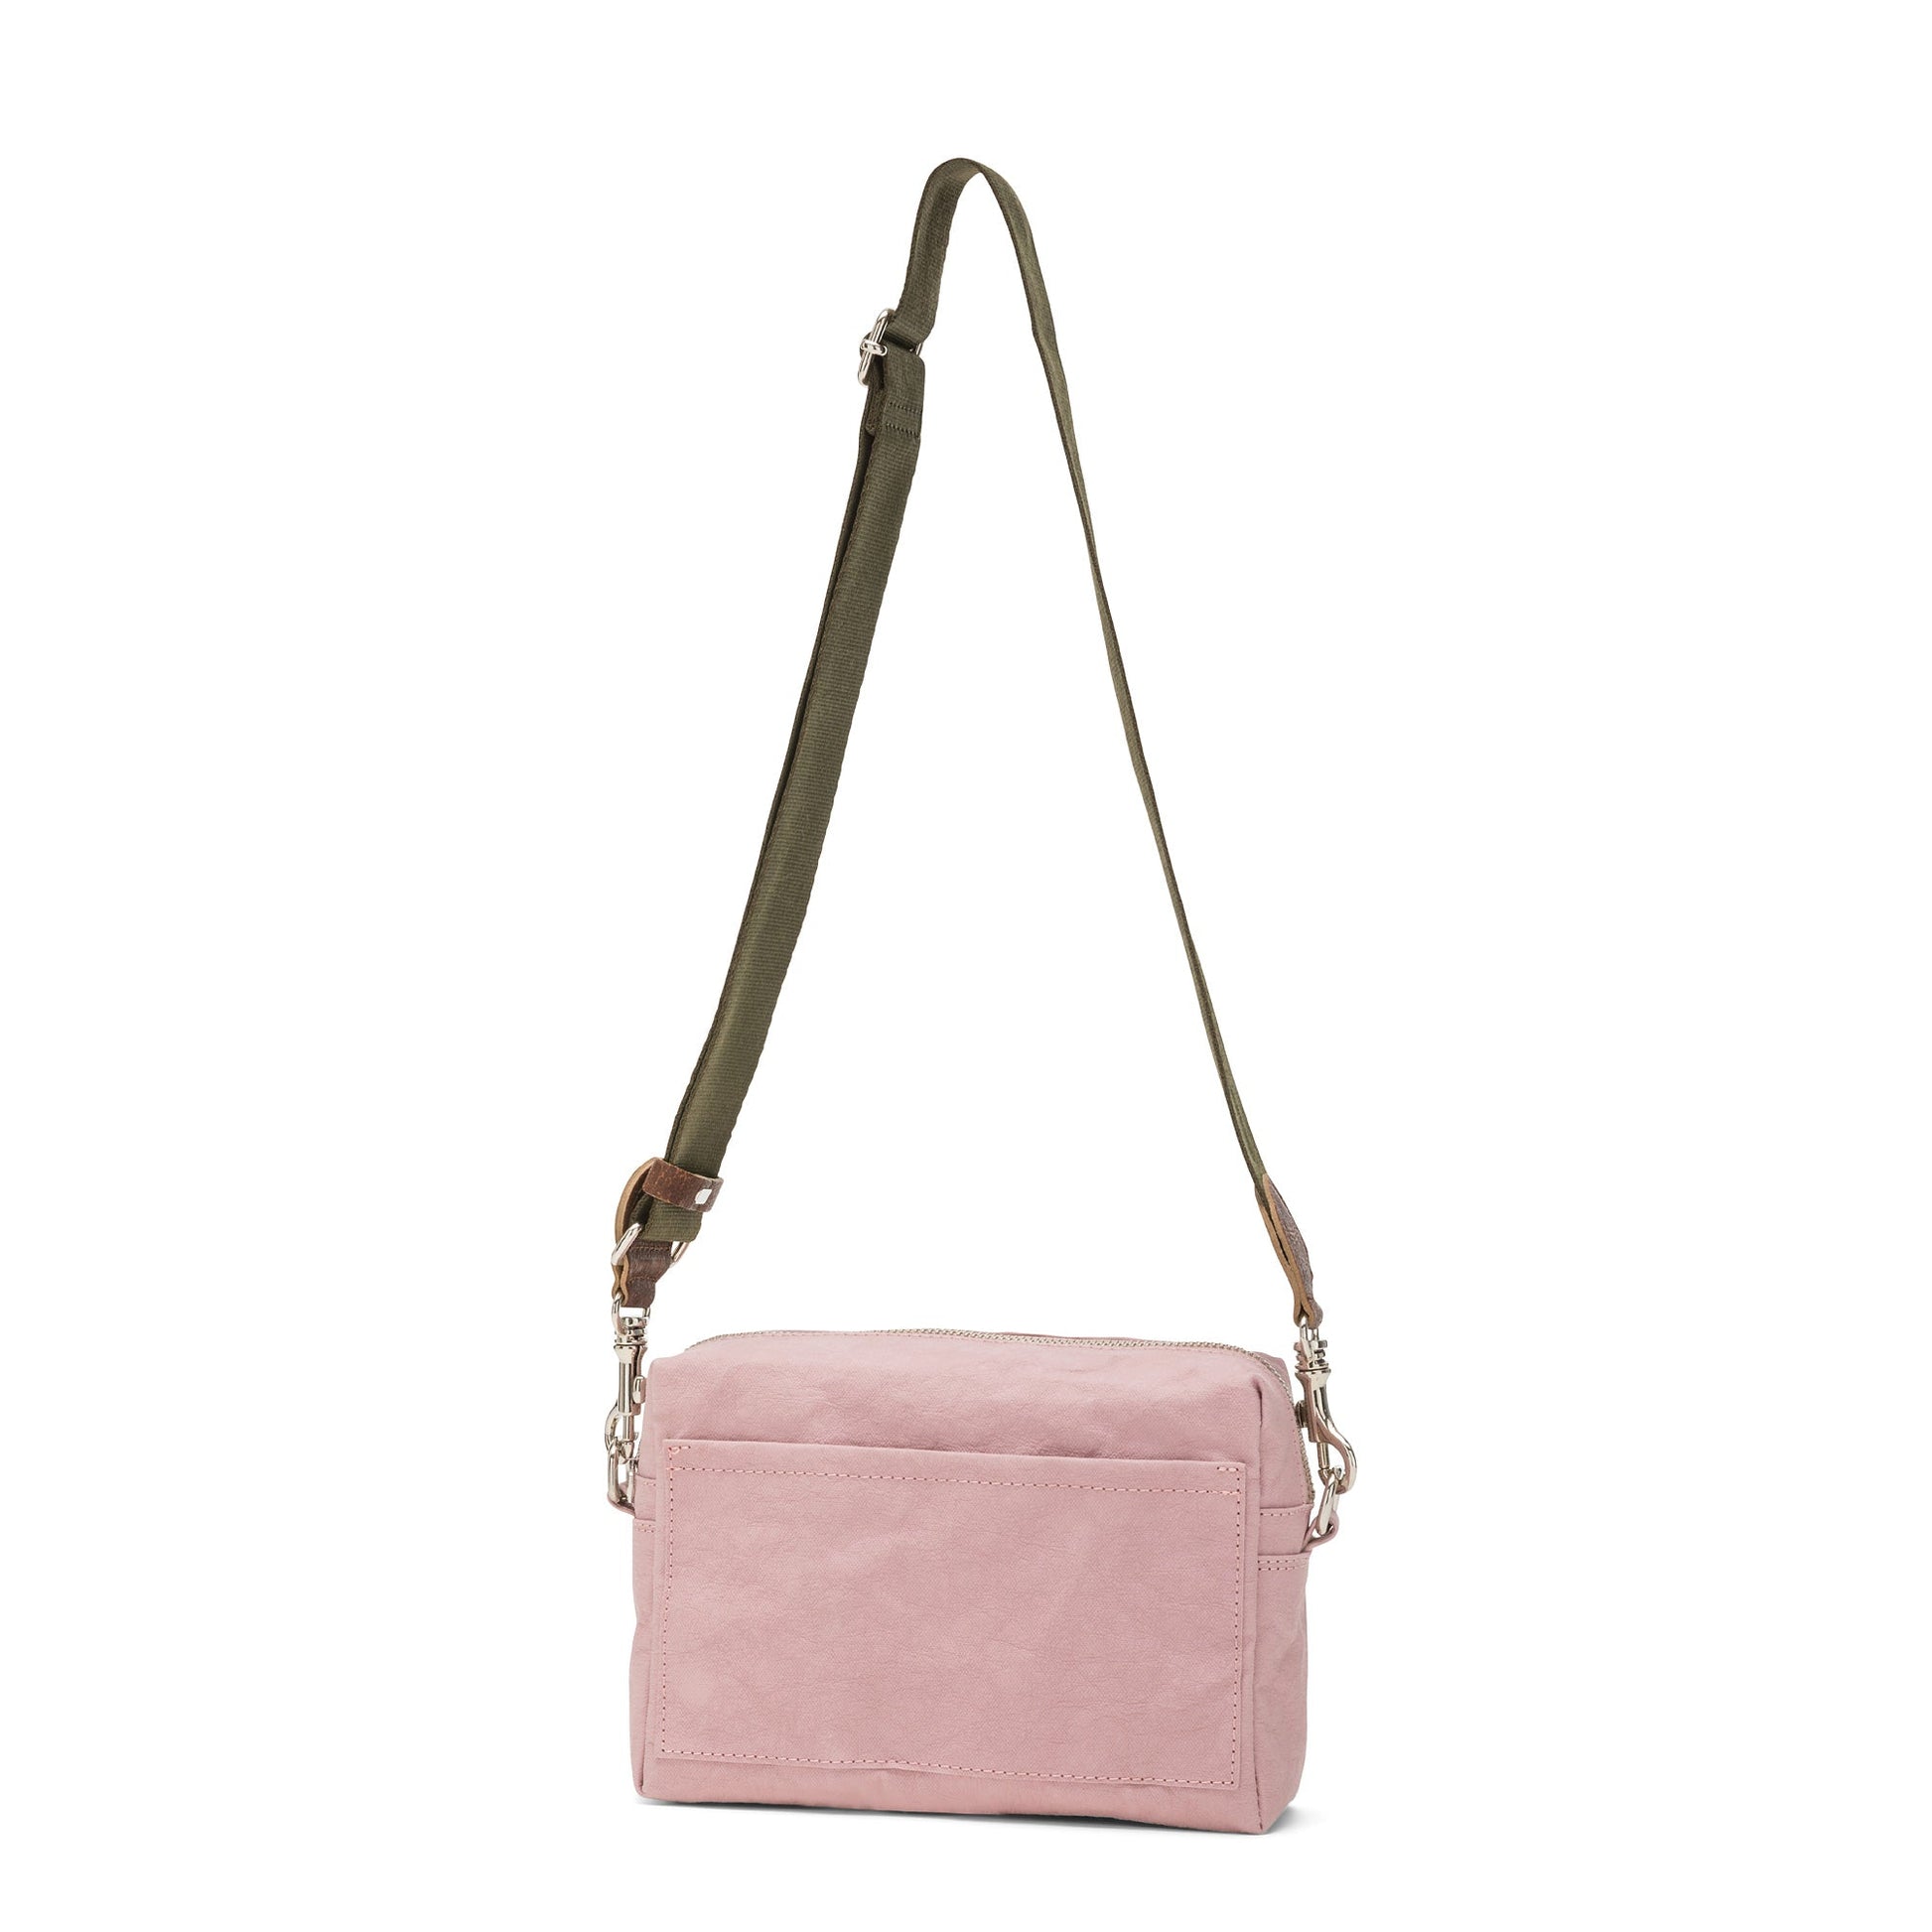 A rectangular washable paper handbag with an external side pocket is shown. The bag has a canvas strap, washable paper details and metal fastening clips to attach the straps to the bag. The bag closes by a zip. The bag shown is pale pink with an olive strap.